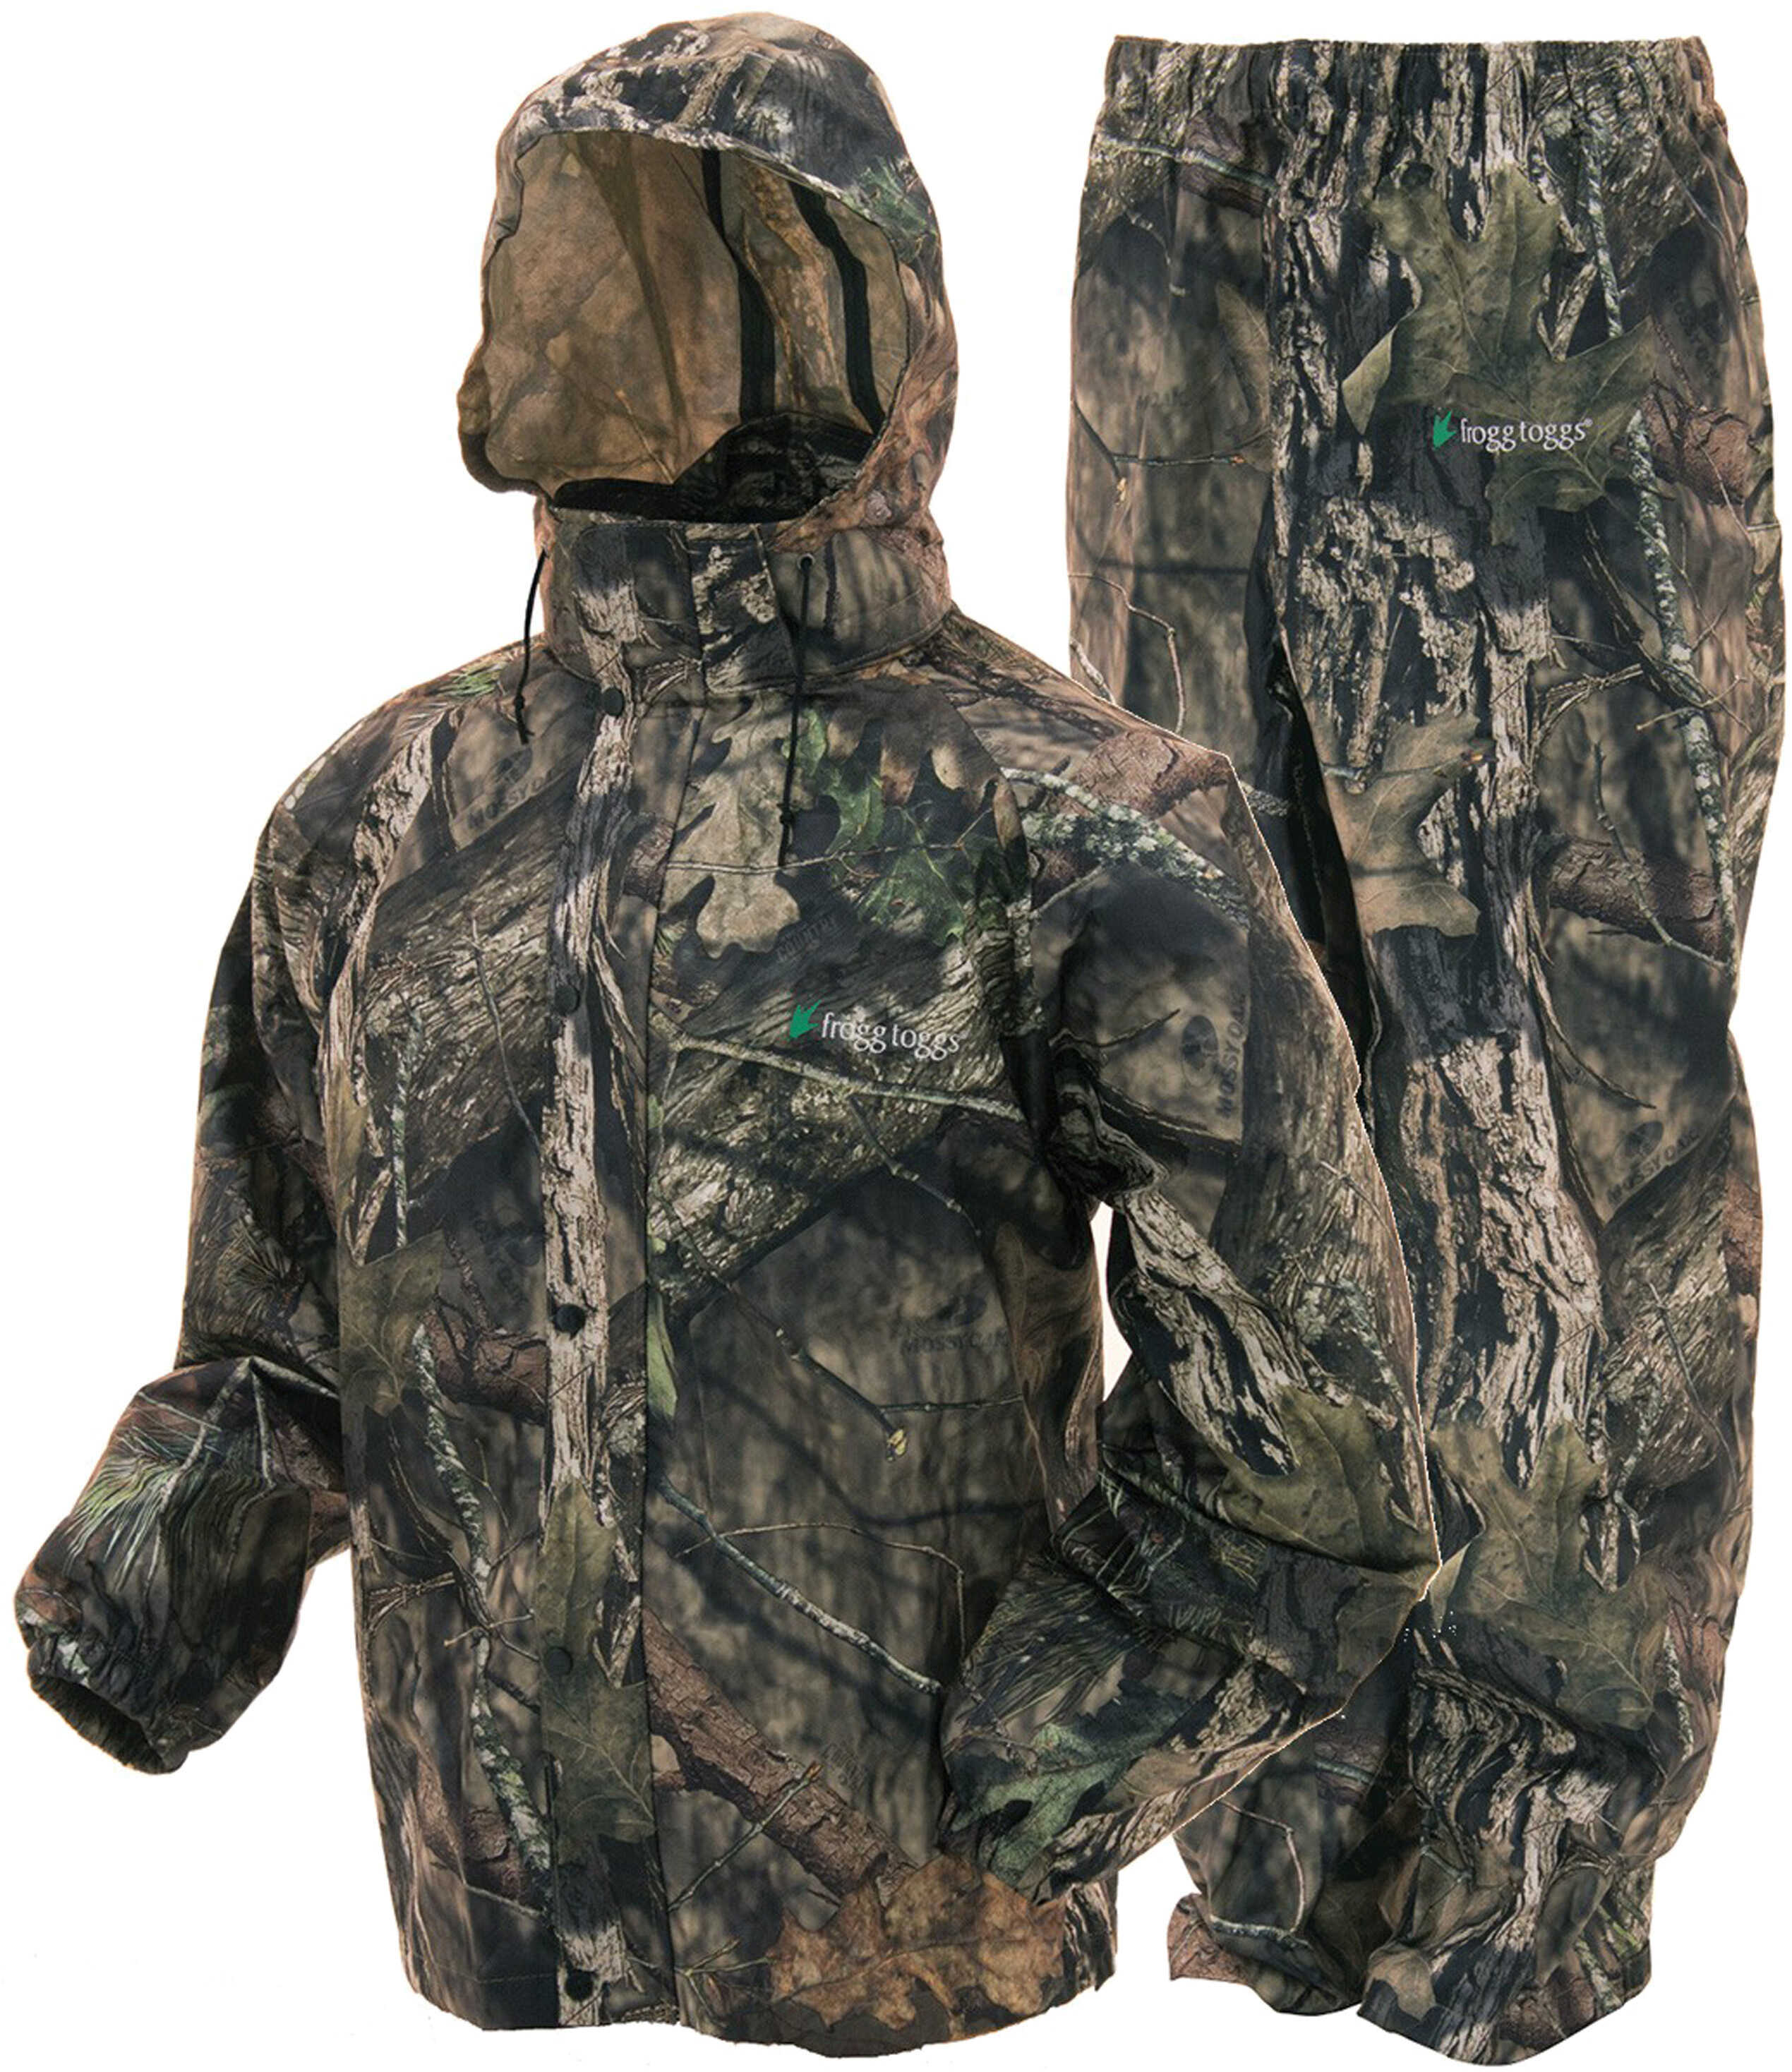 Frogg Toggs All Sport Suit, Mossy Oak Break Up Country Small Md: AS1310-62SM